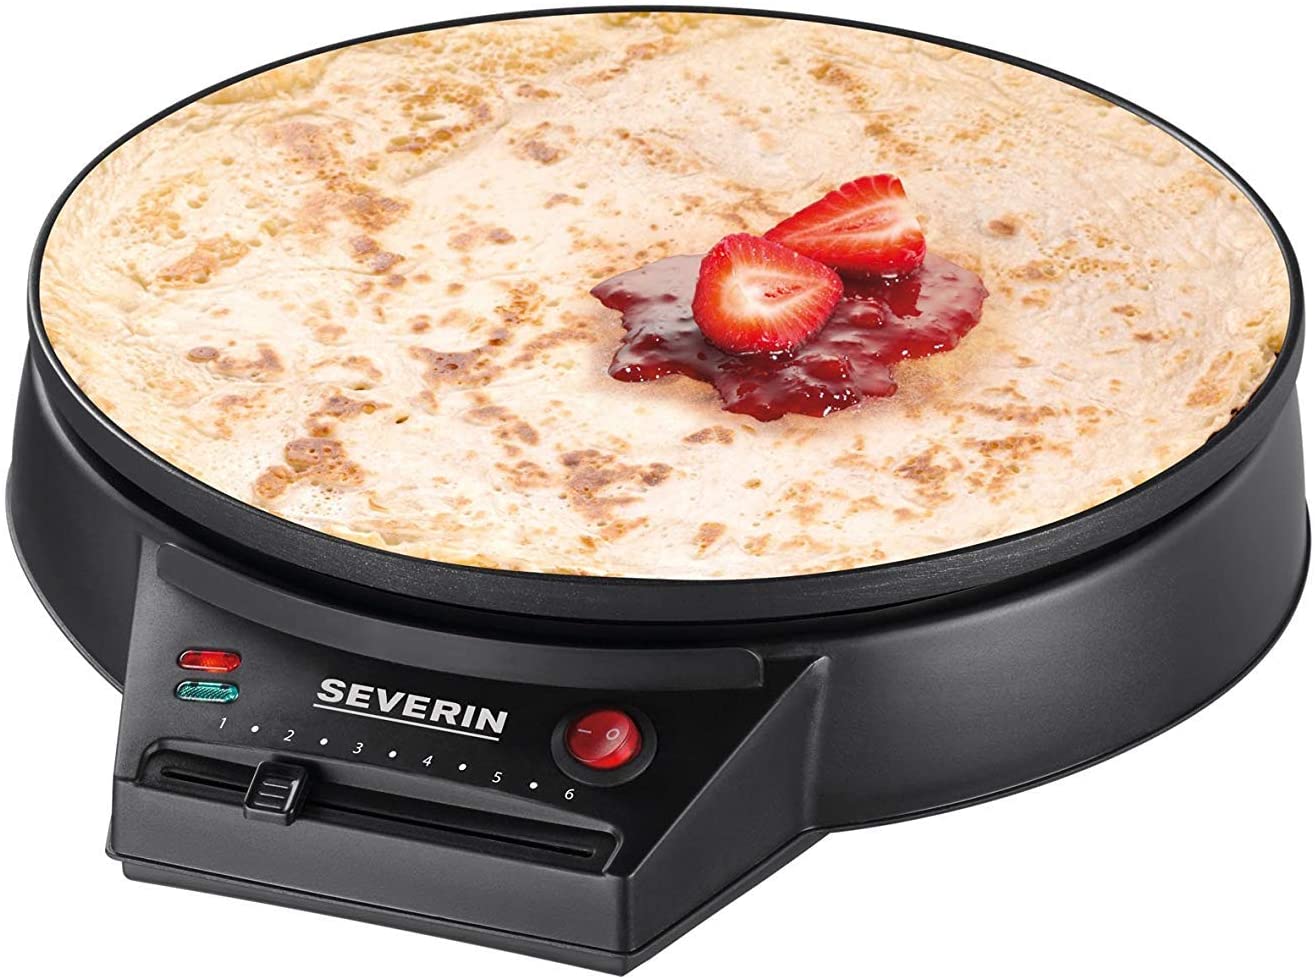 SEVERIN CM 2198 Crepes Maker, Crepes Iron for Sweet Crepes and Savoury Gale